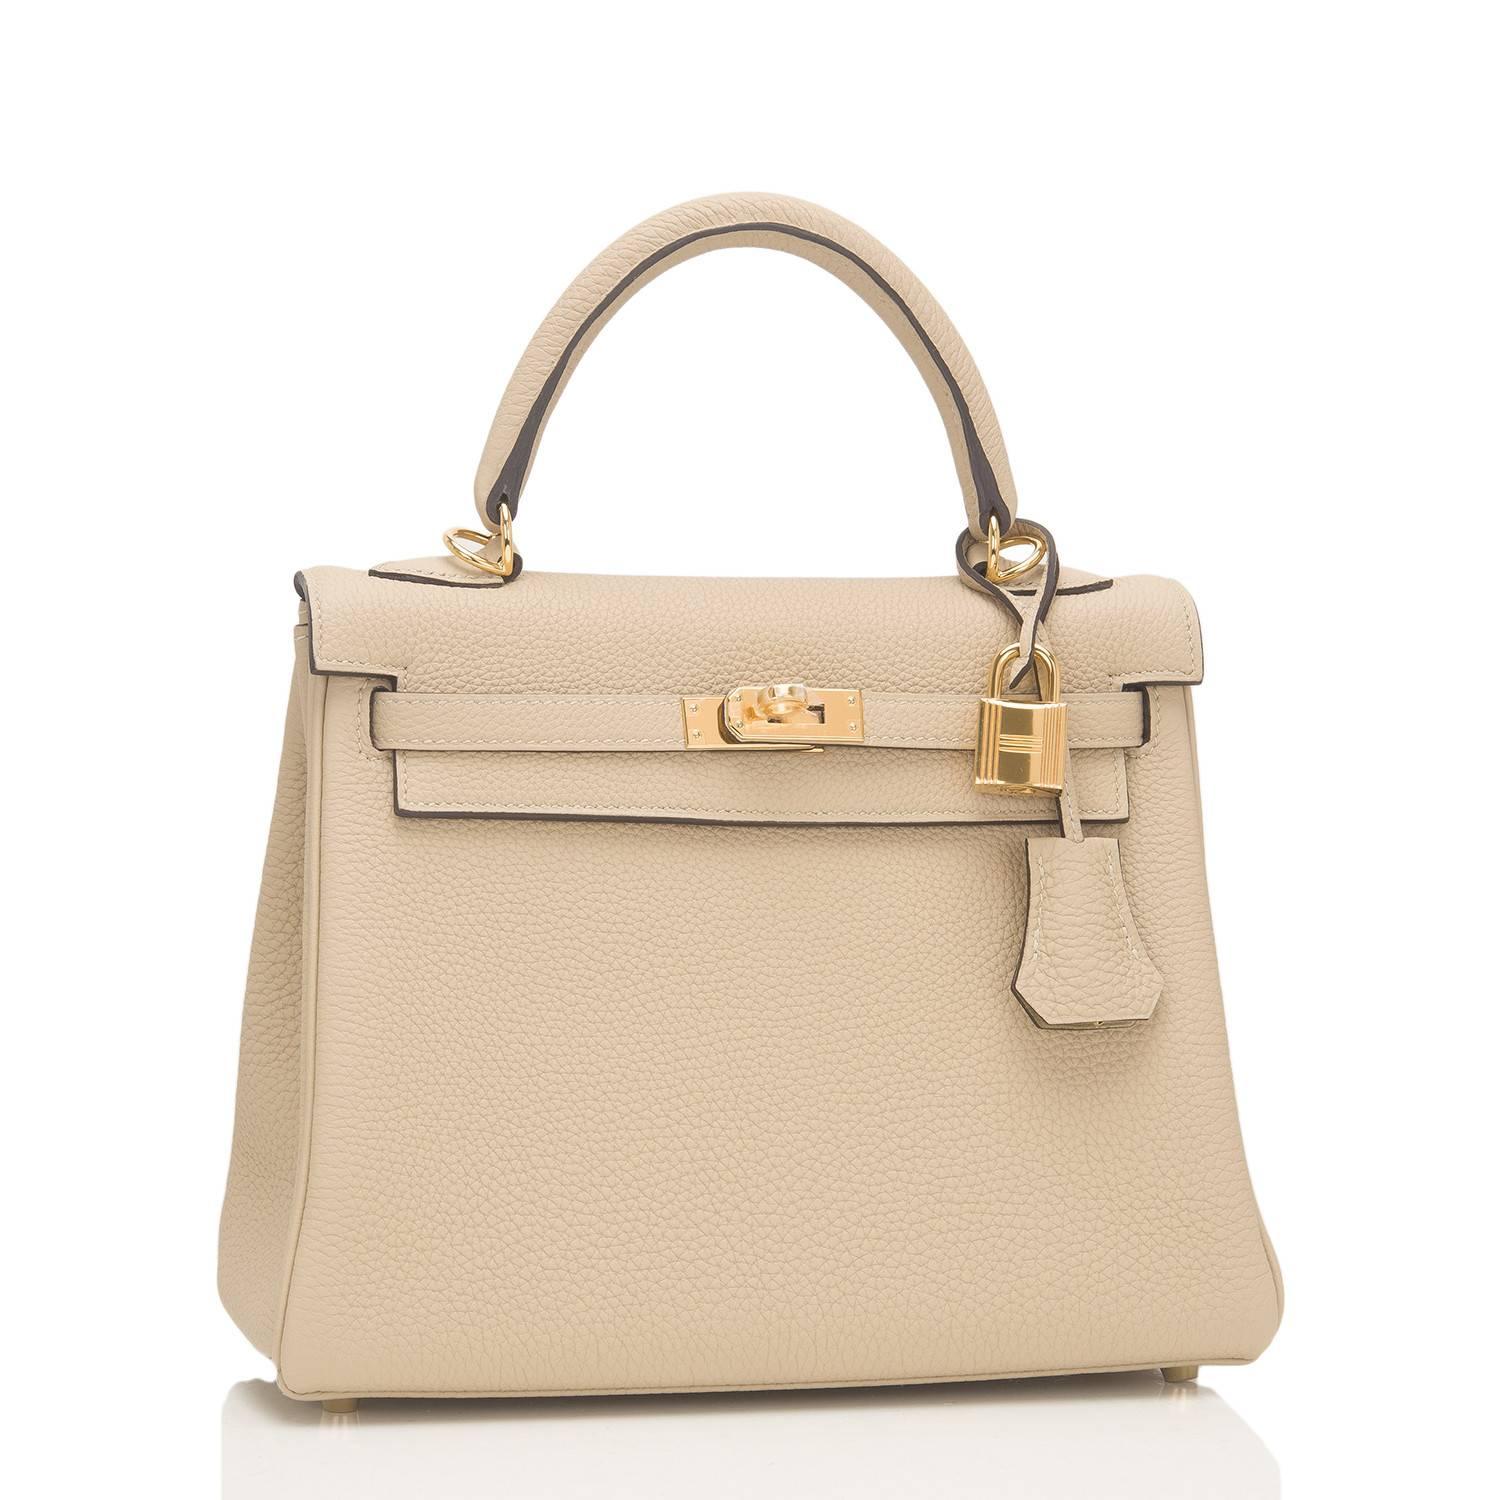 Hermes Trench Kelly 25cm of togo leather with gold hardware.

This Kelly in the Retourne style has tonal stitching, a front toggle closure, a clochette with lock and two keys, a single rolled handle, and a removable shoulder strap.

The Interior is